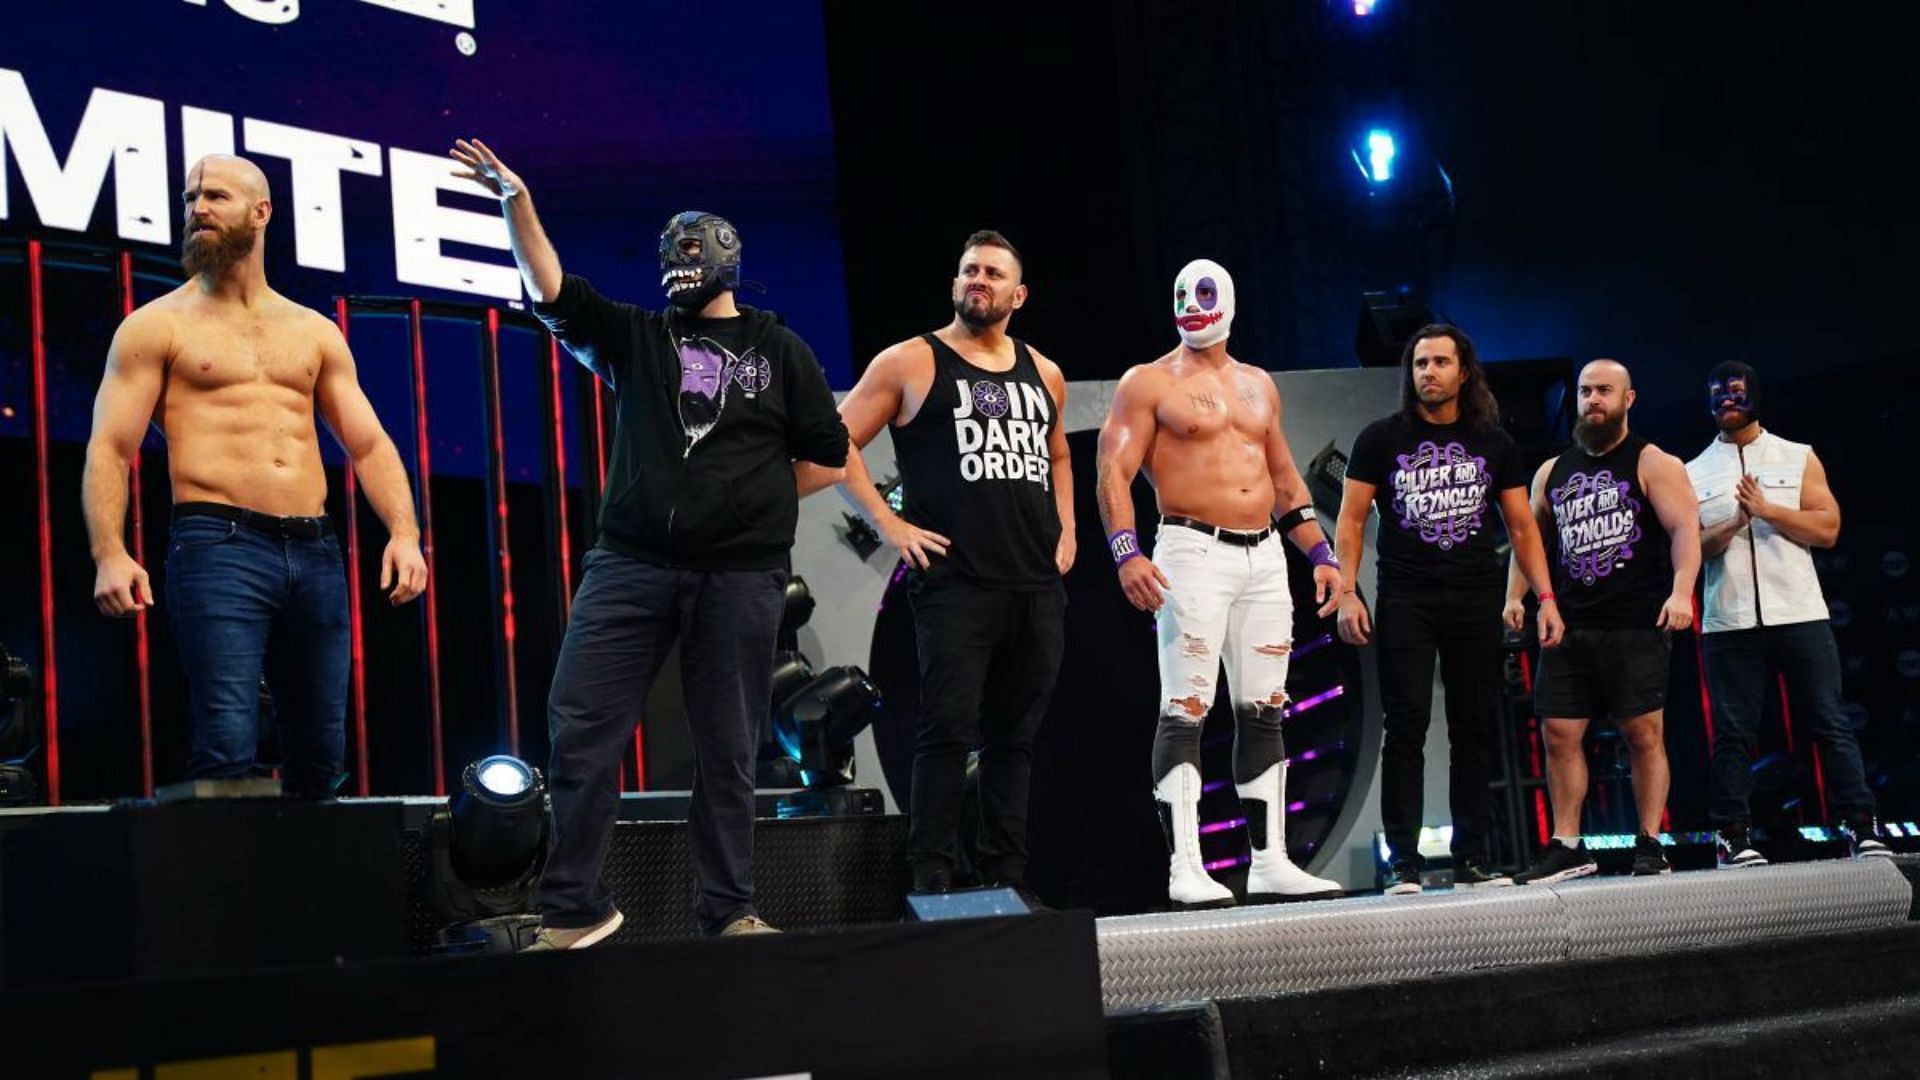 The Dark Order at an AEW Dynamite event in 2021